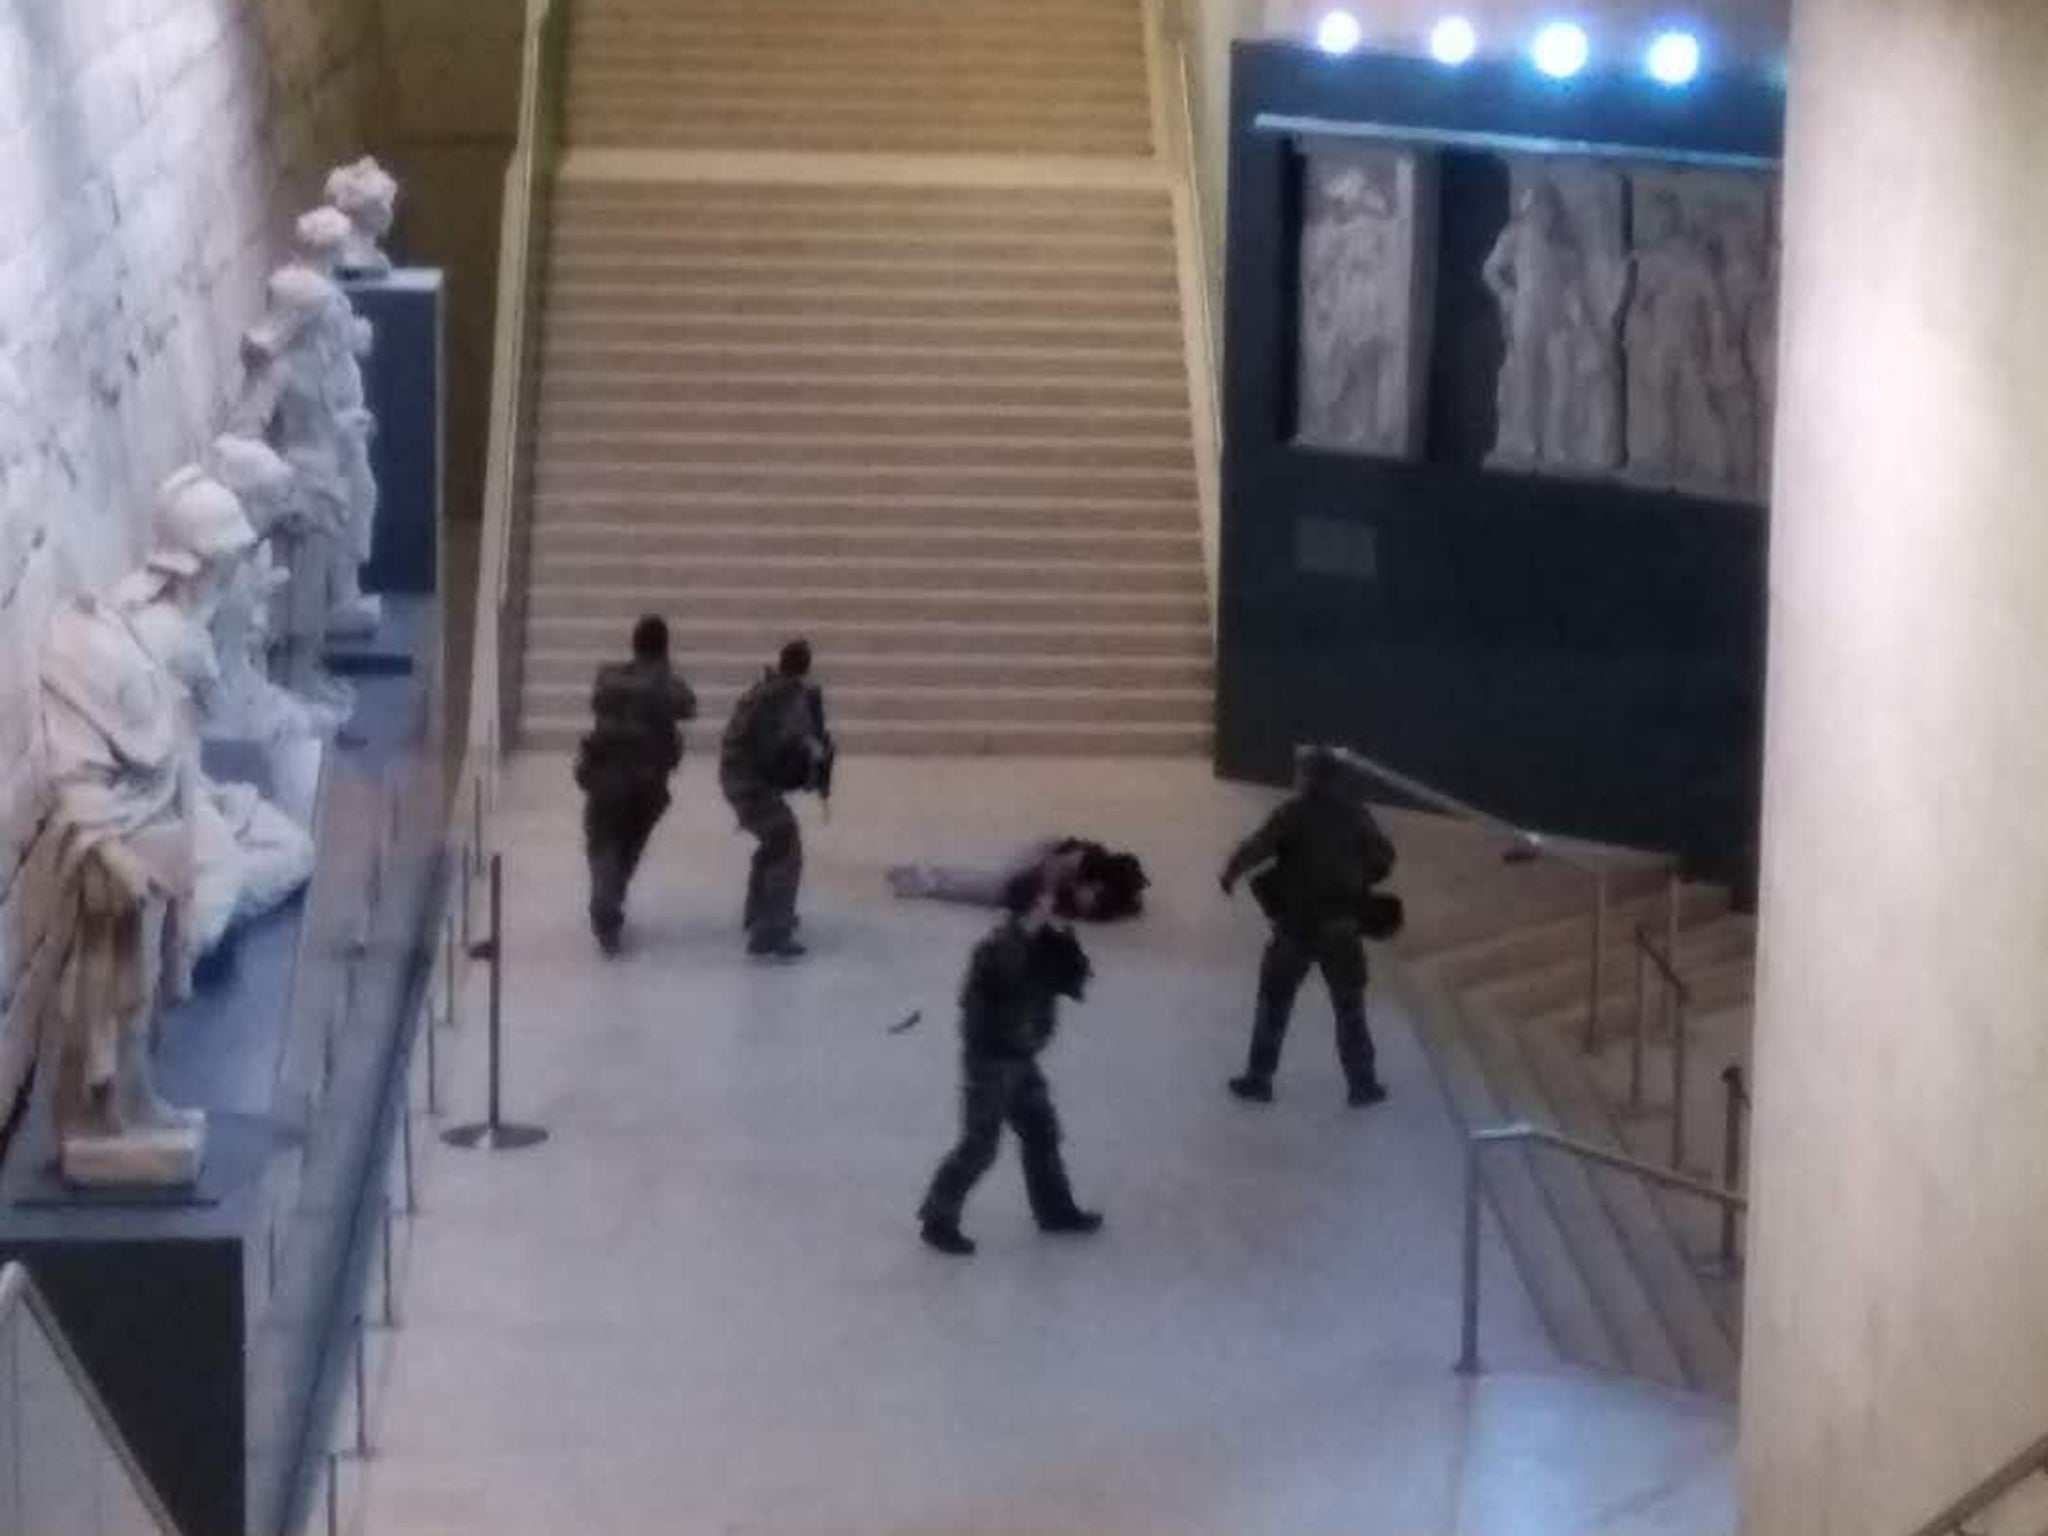 Photo taken by a tourist with a mobile phone shows a soldier opening fire at a man in the Louvre Museum